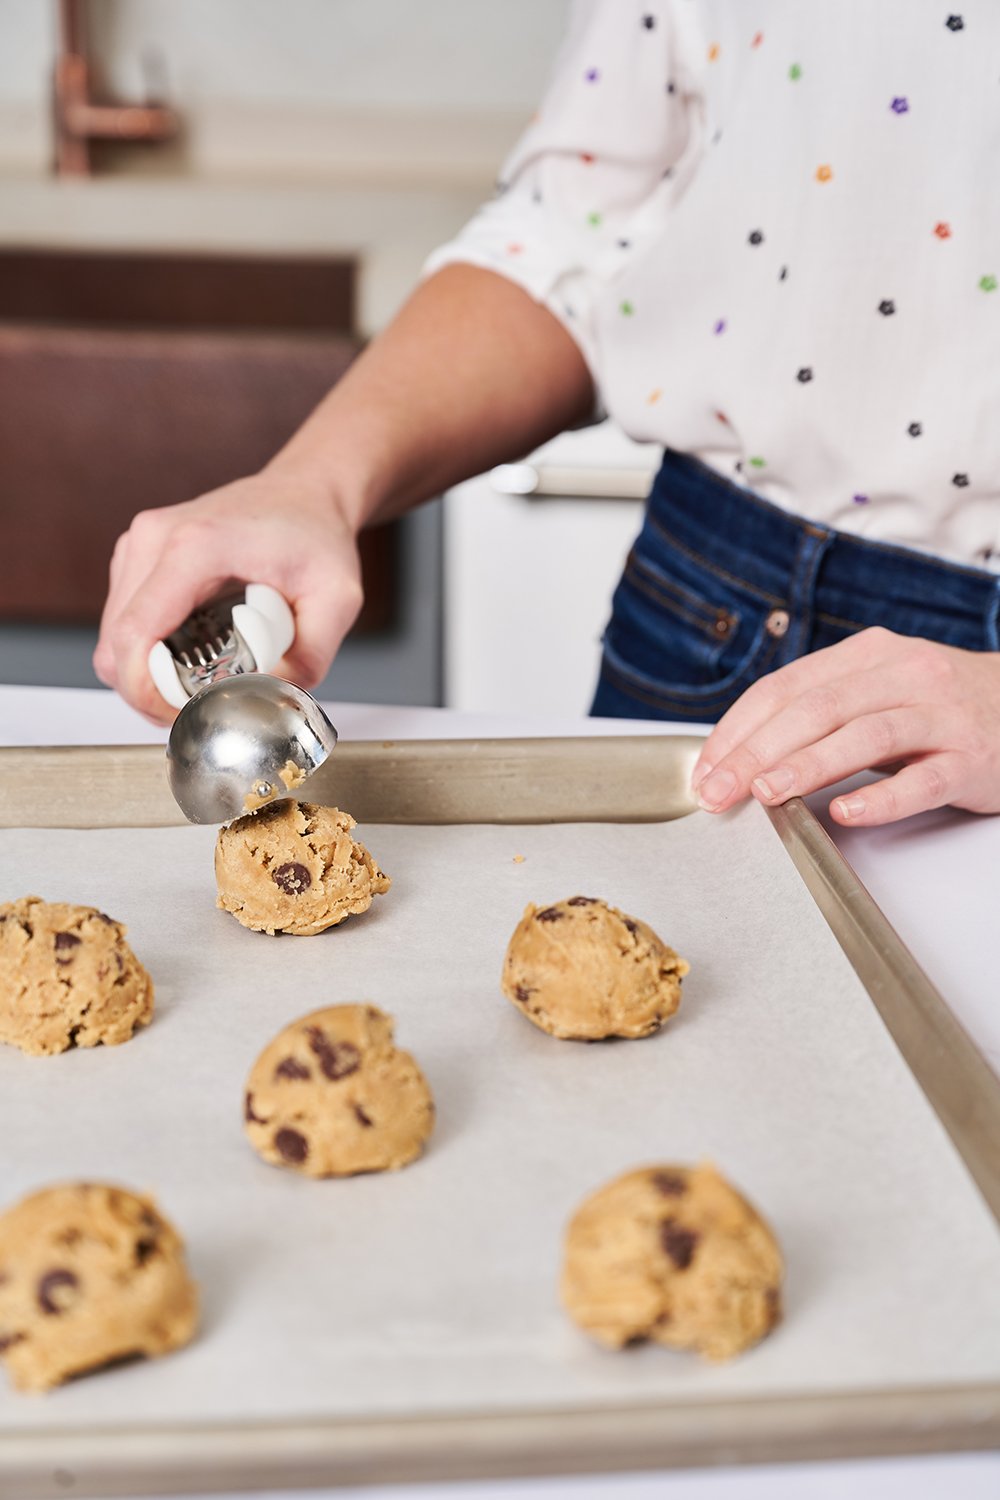 https://handletheheat.com/wp-content/uploads/2022/11/why-to-use-a-cookie-scoop.jpg